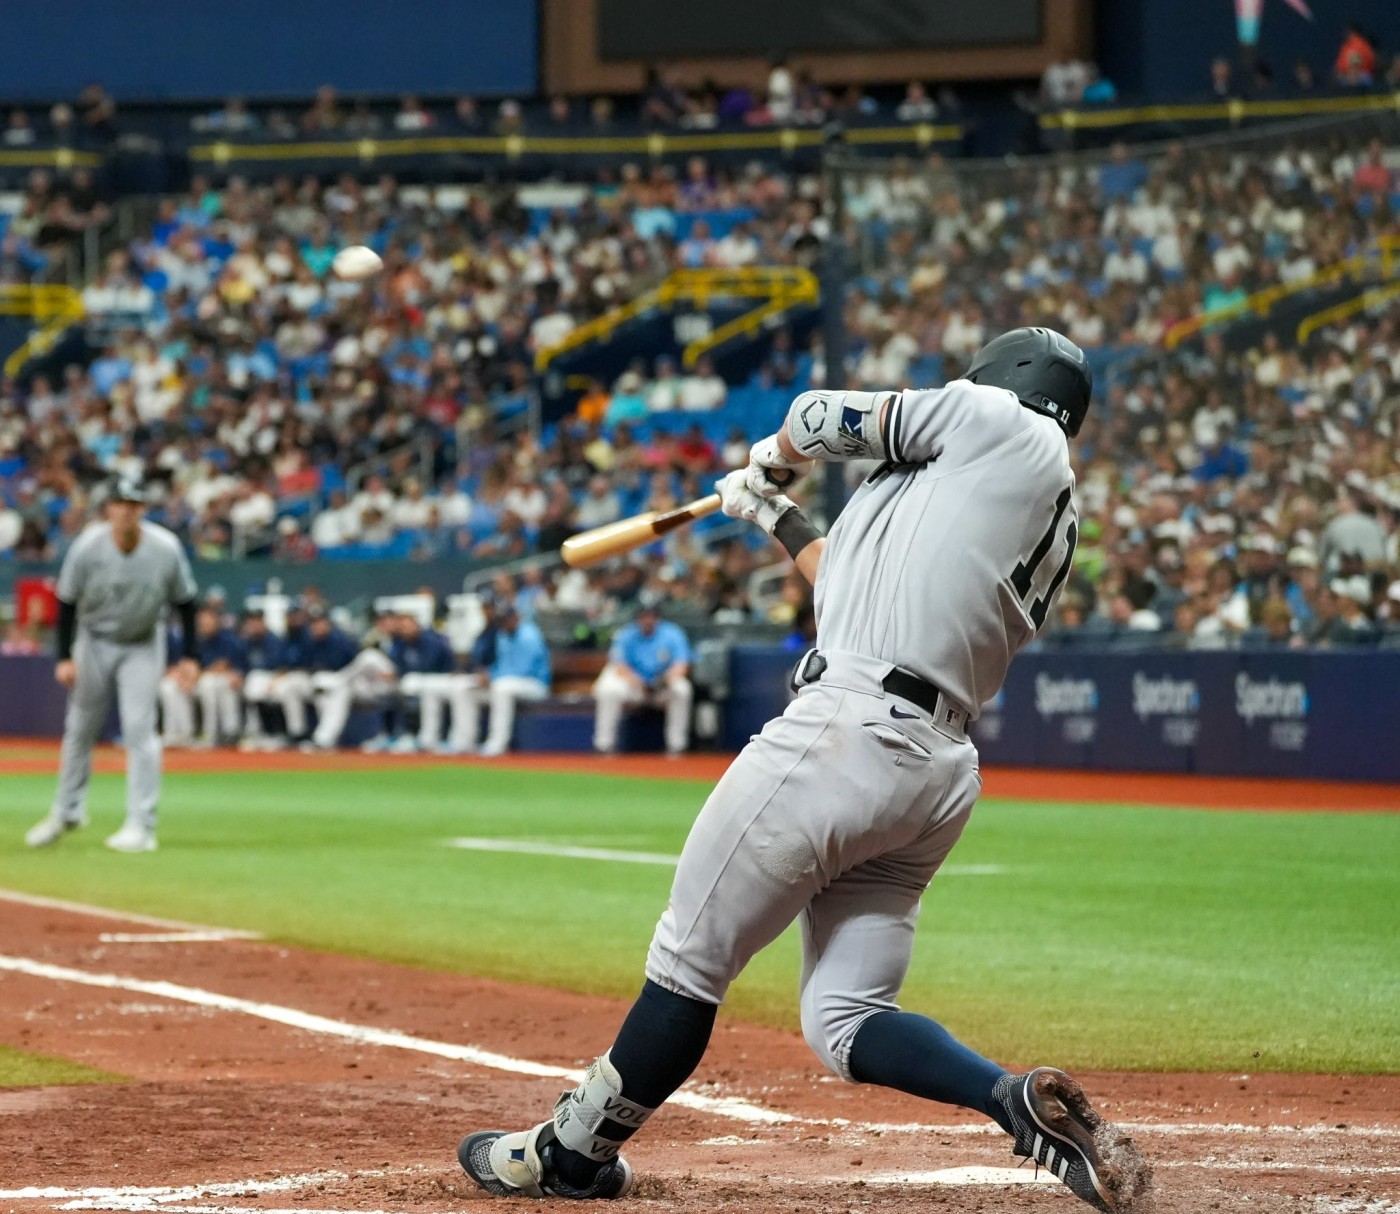 Yankees rookie shortstop Anthony Volpe is swinging against the Rays in Tampa on Aug 27, 2023.